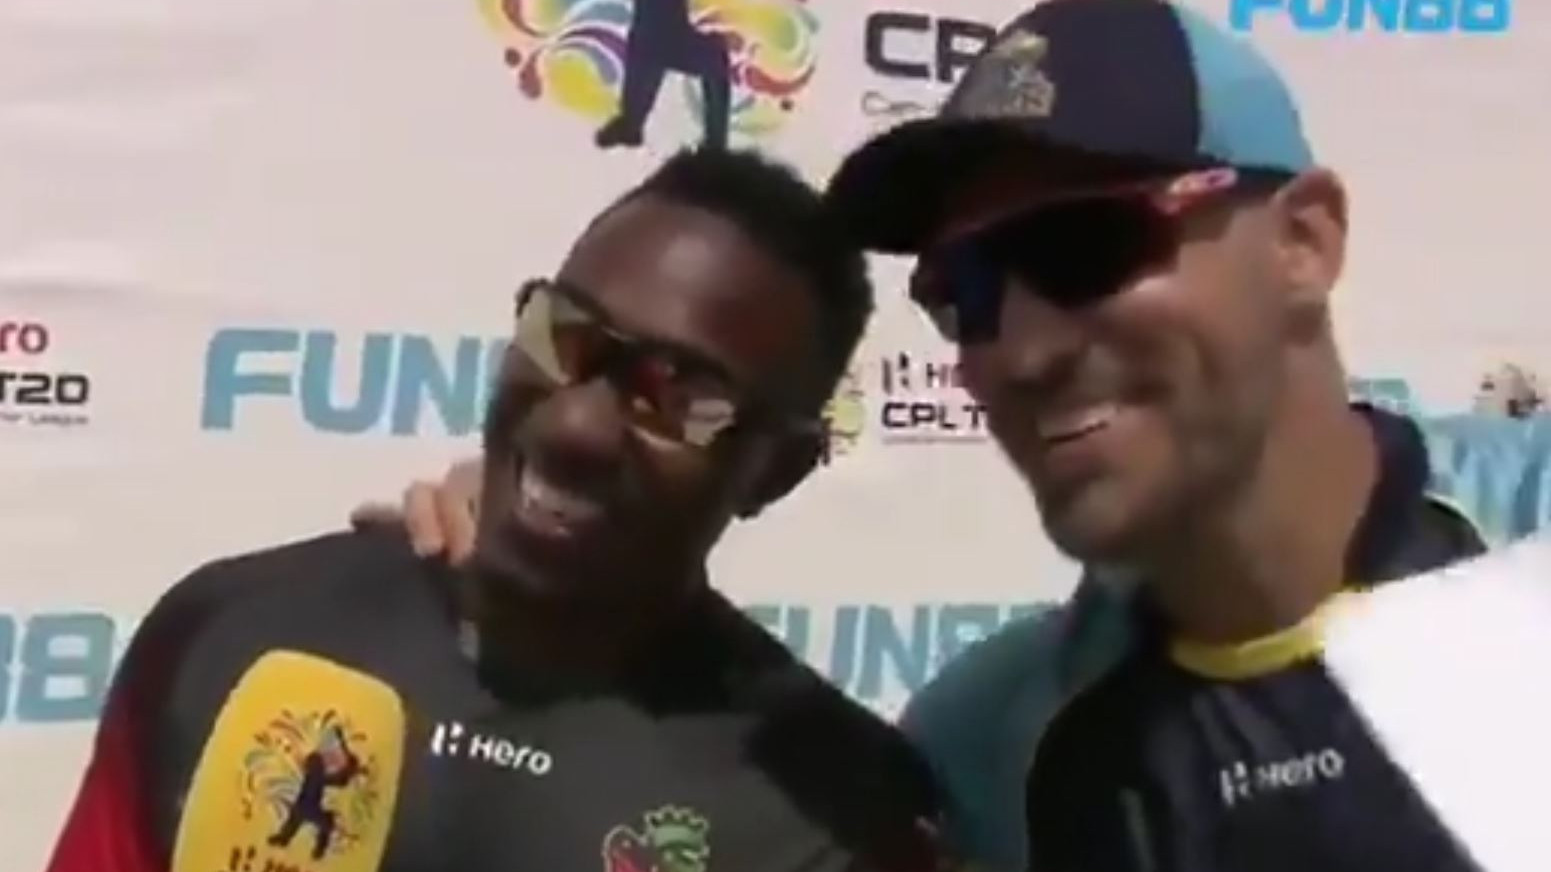 CPL 2021: WATCH- Dwayne Bravo and Faf du Plessis sing 'We are Chennai Boys, Making All the Noise' after toss